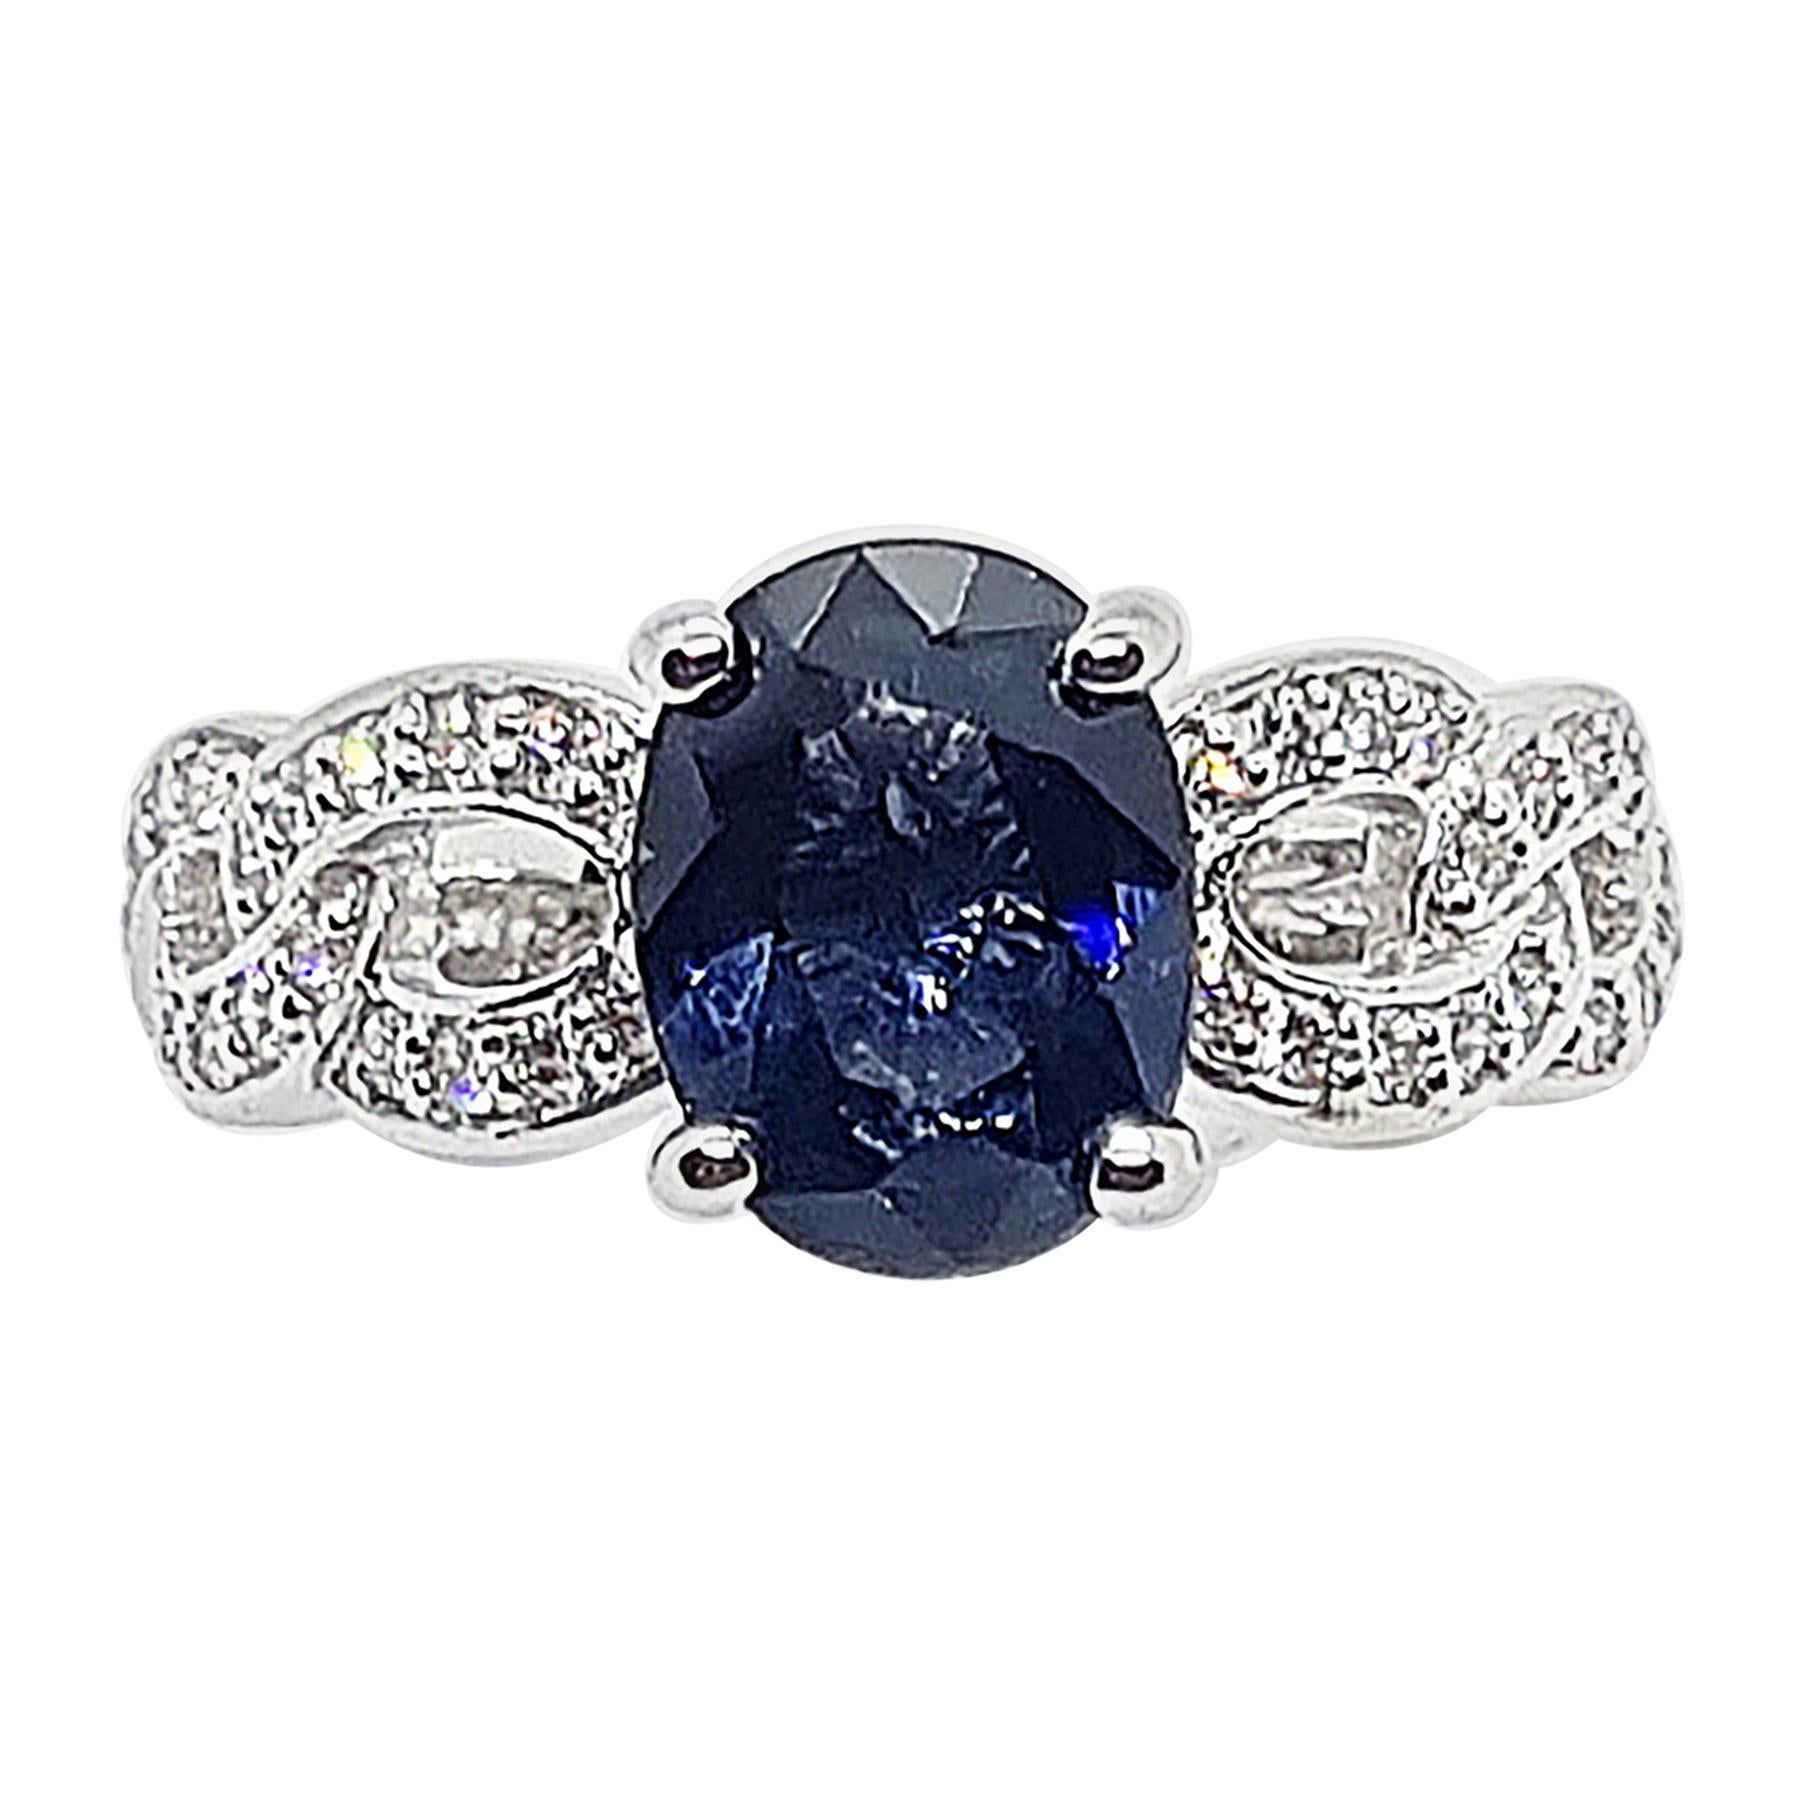 Certified Unheated Cobalt Blue Spinel with Diamond Ring in 18K White Gold 